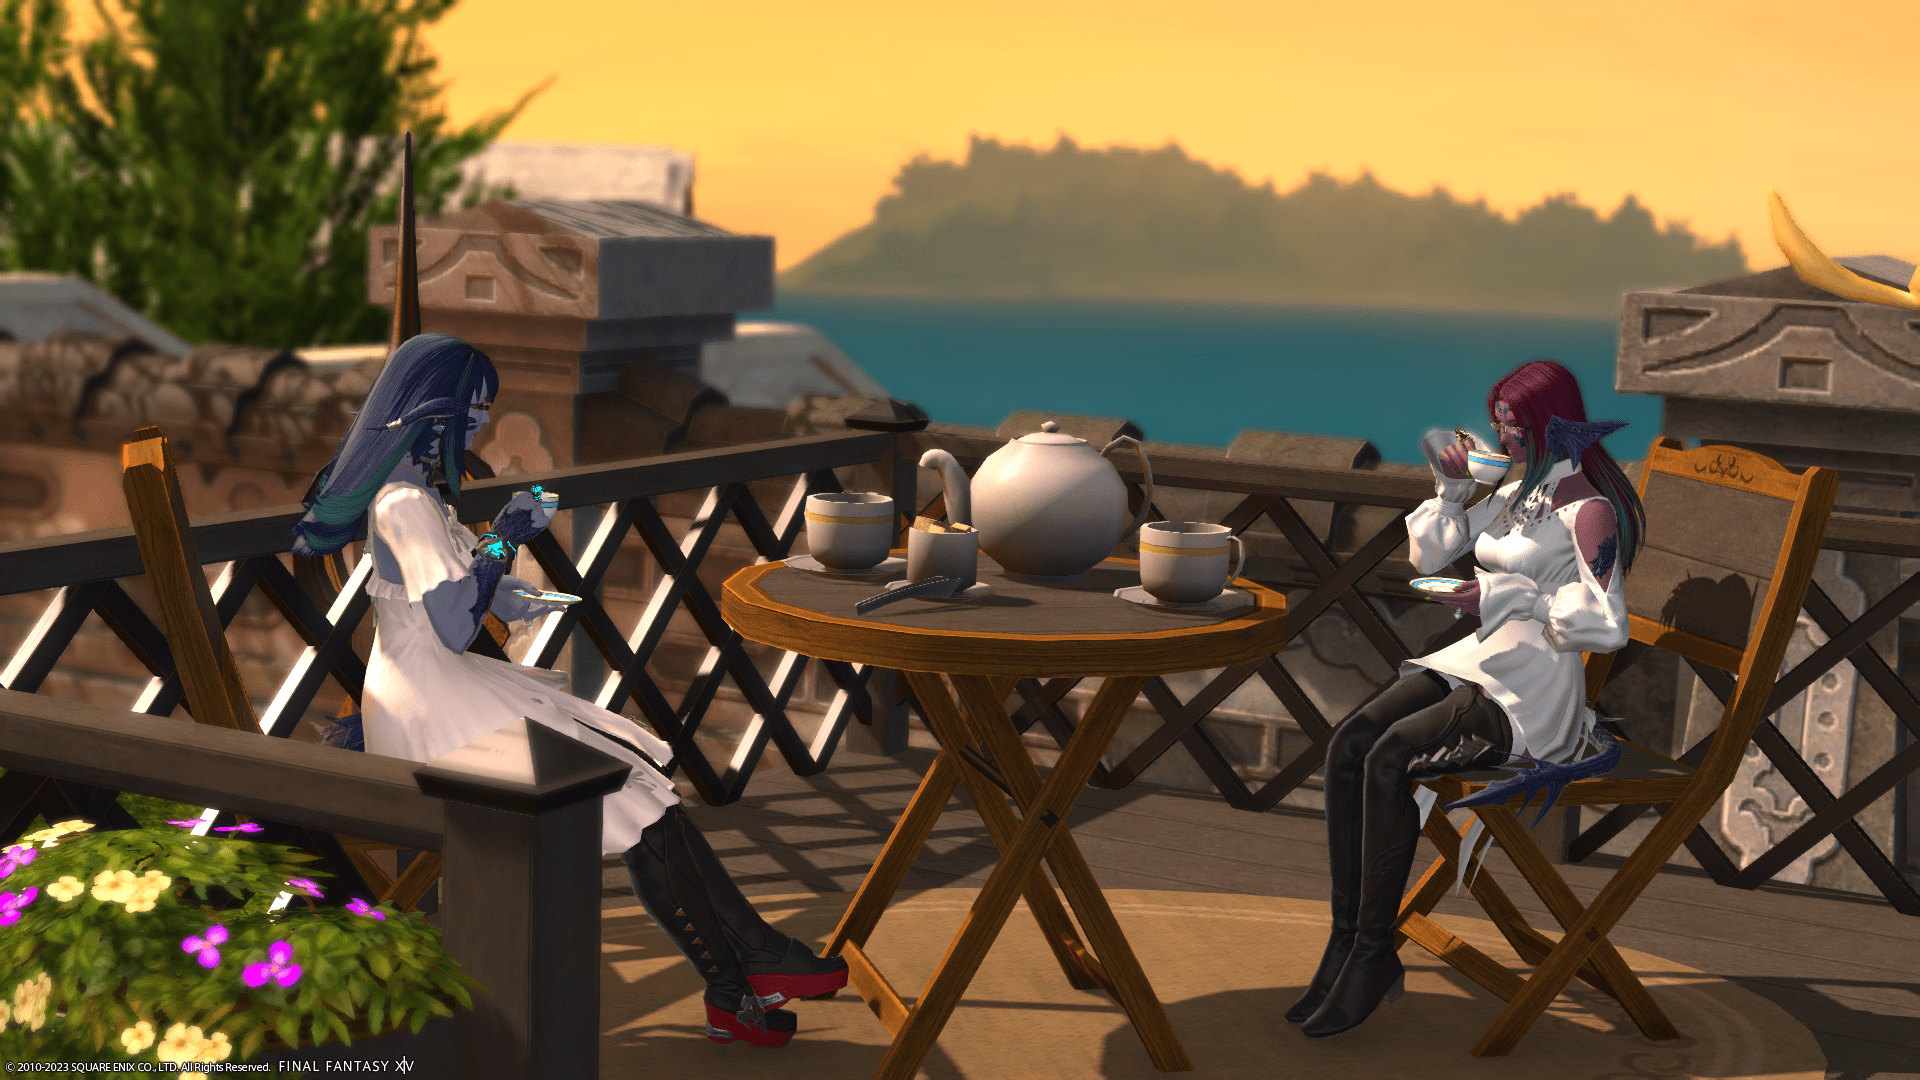 Laureine and her cousin, Lizicus having tea on a deck during a sunset in Final Fantasy XIV.